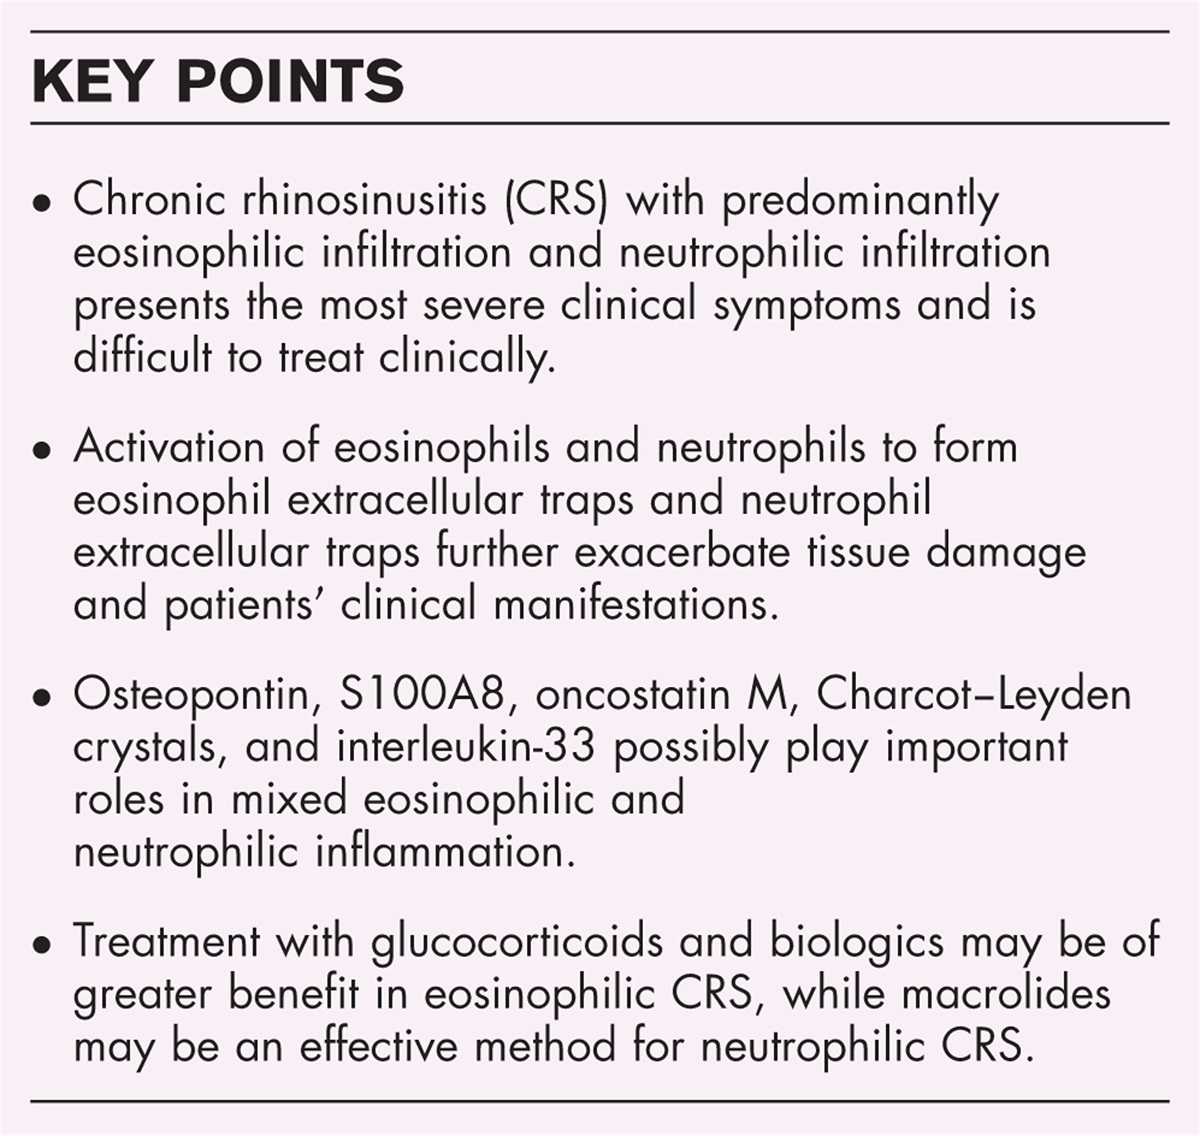 Interaction of eosinophilic and neutrophilic inflammation in patients with chronic rhinosinusitis